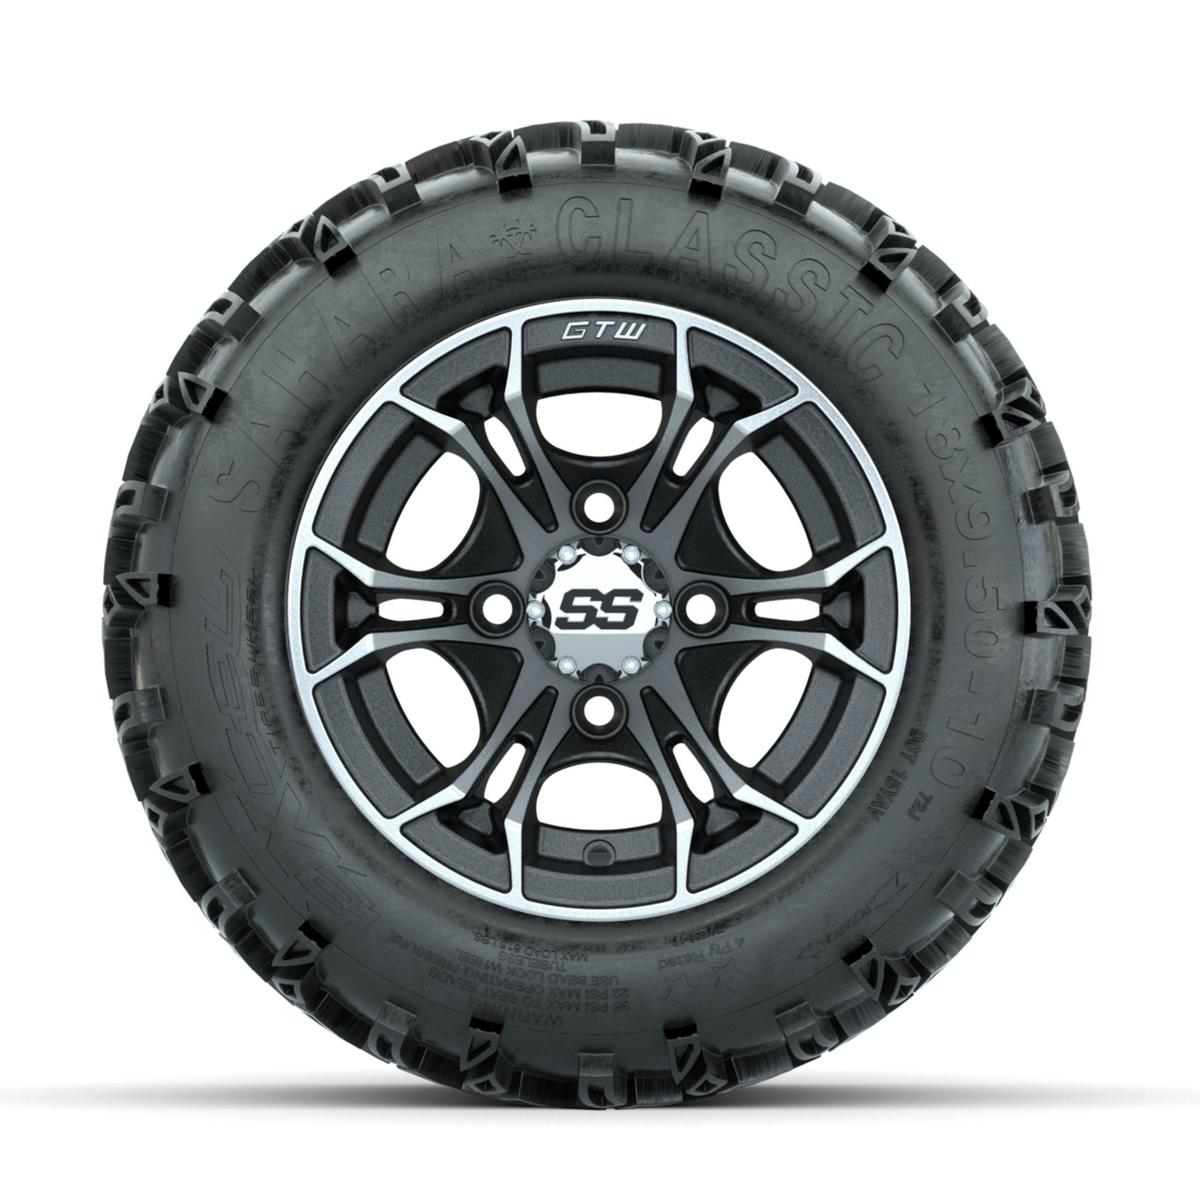 GTW Spyder Machined/Matte Grey 10 in Wheels with 18x9.50-10 Sahara Classic All Terrain Tires – Full Set